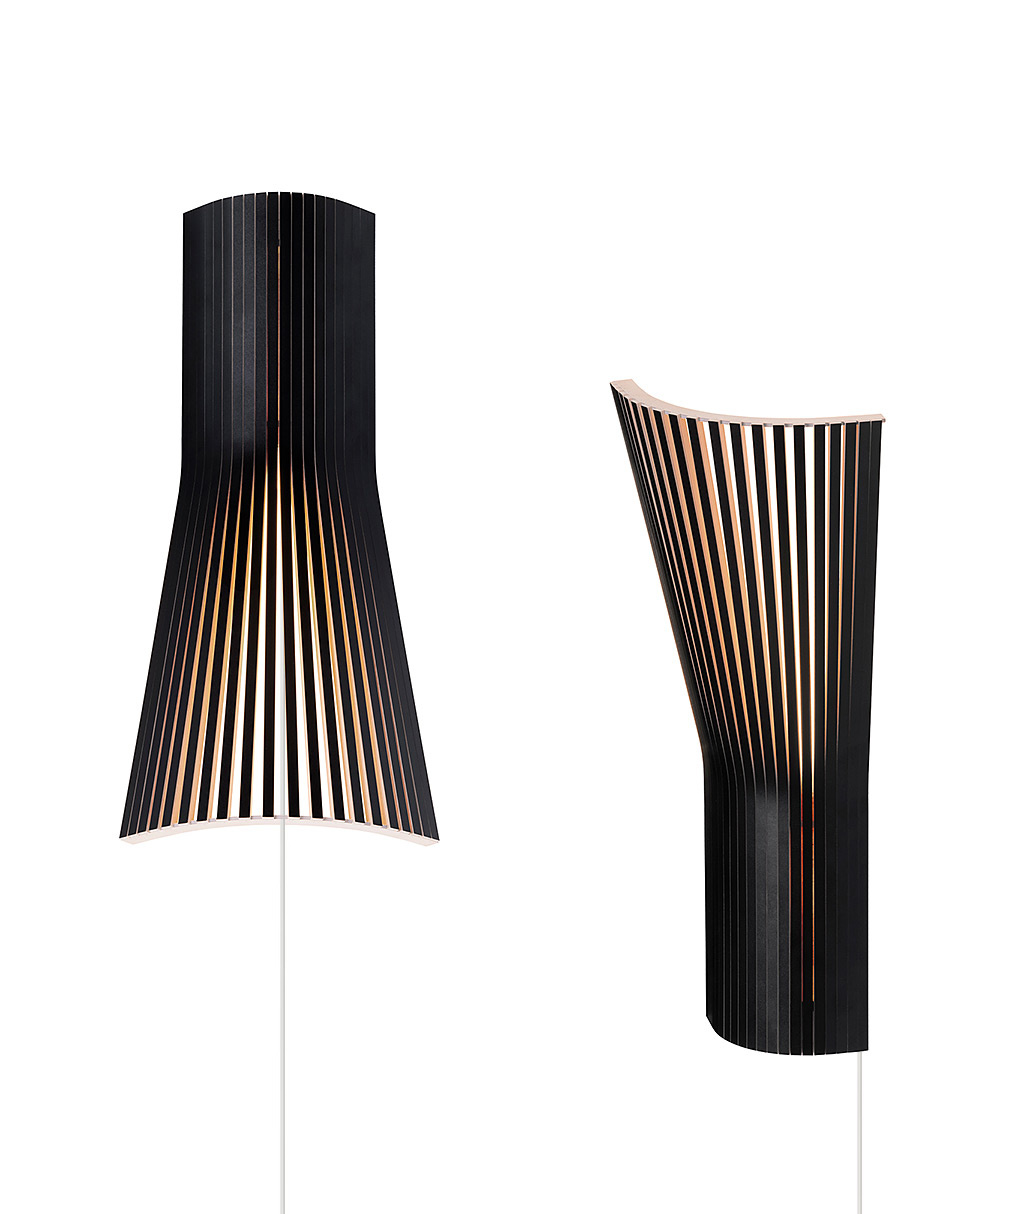 Secto Small 4237 corner lamp is available in black laminated